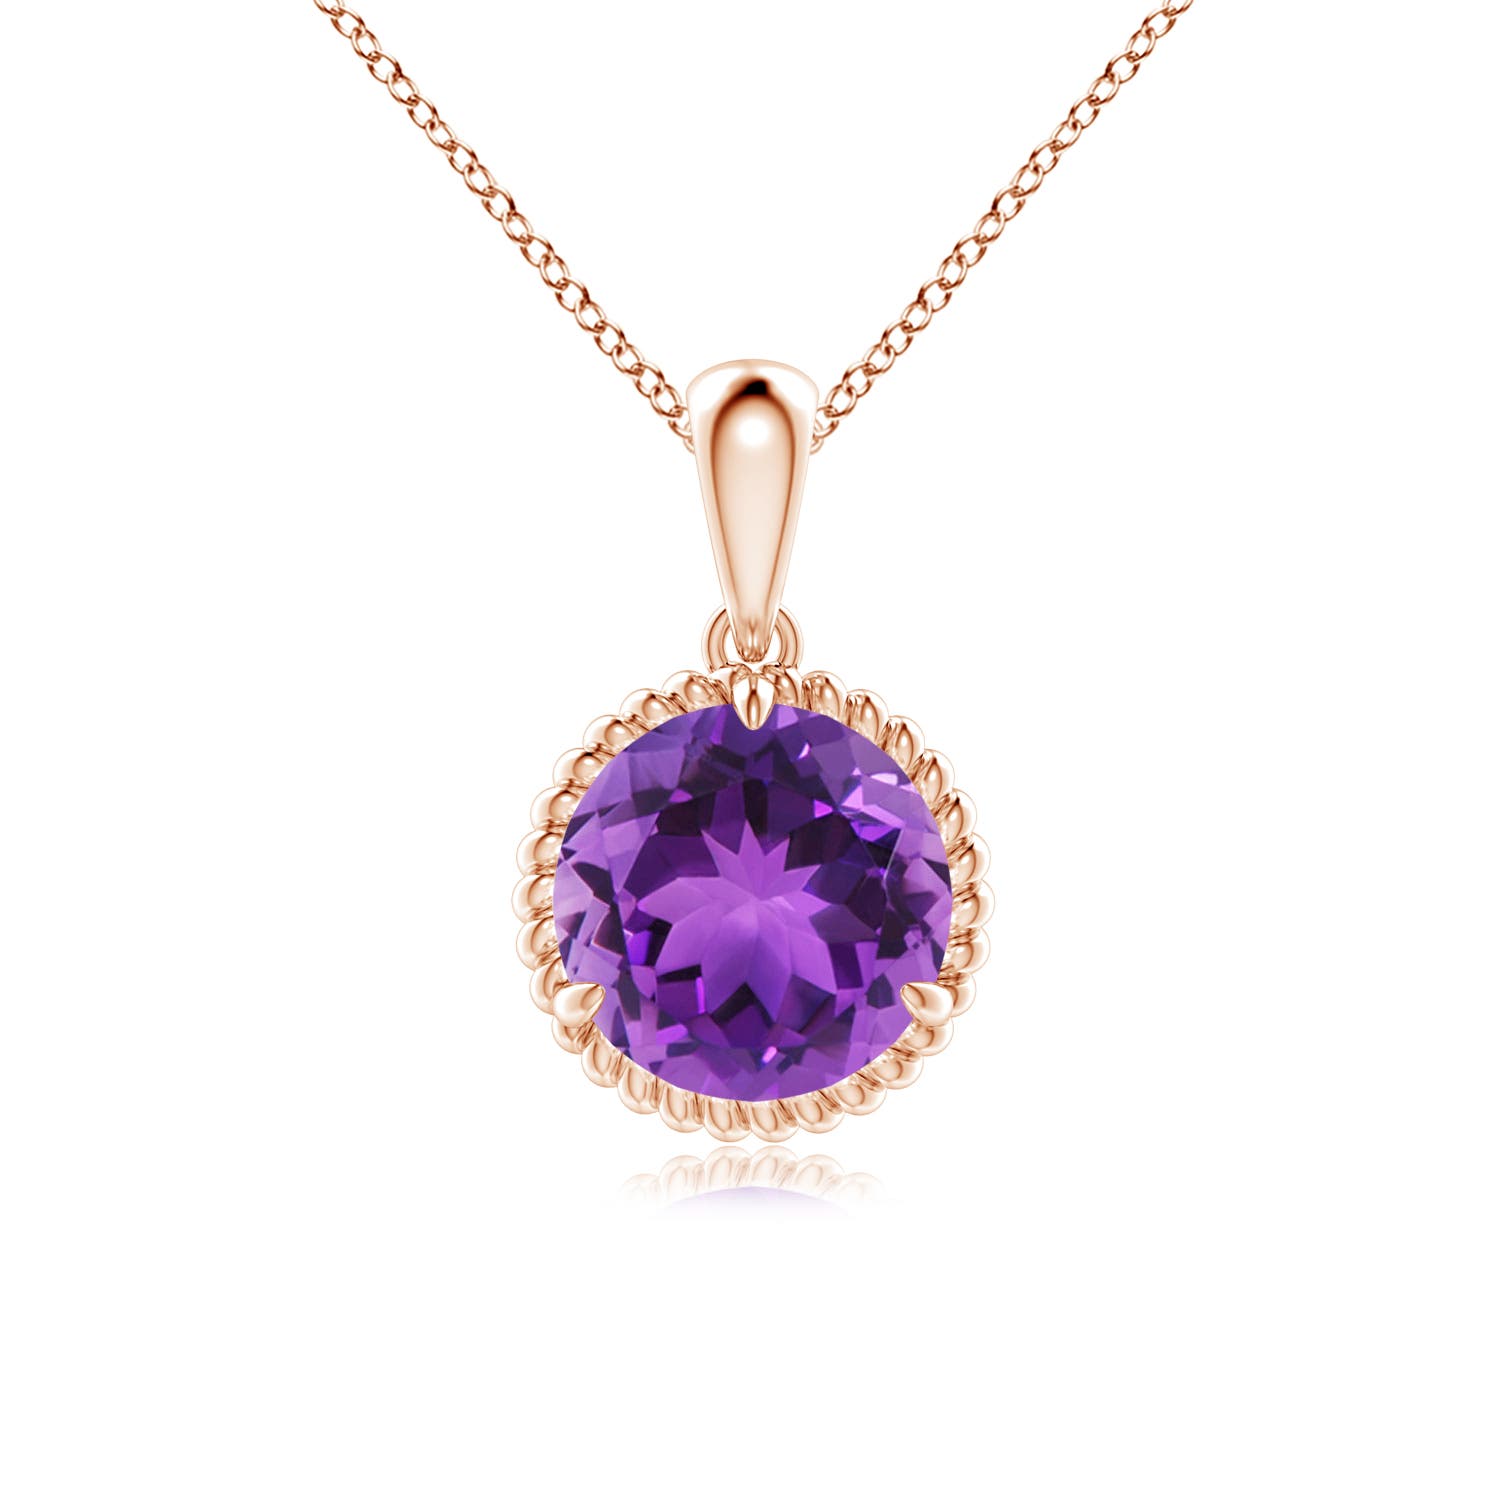 AAA - Amethyst / 1.7 CT / 14 KT Rose Gold